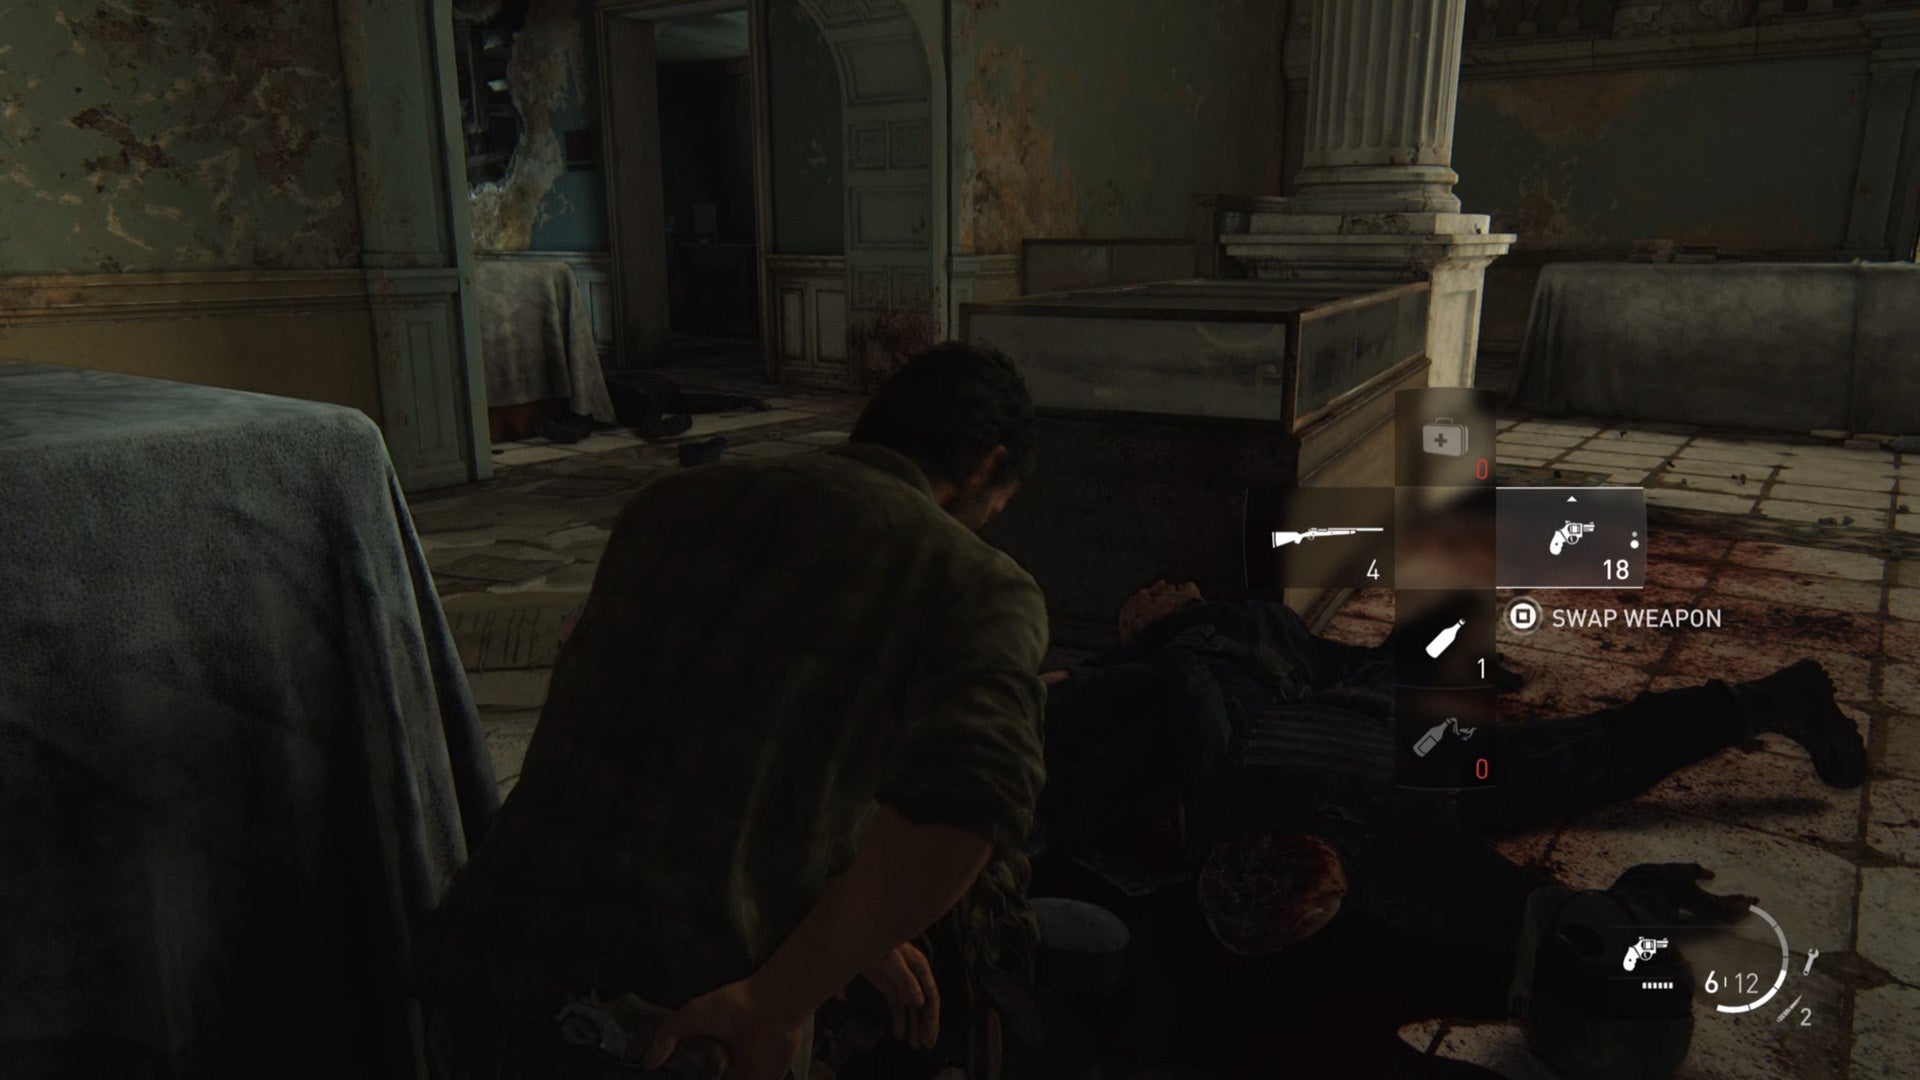 The slow push and pull of item management is a part of The Last of Us' drama and tension. (Screenshot: Naughty Dog / Kotaku)